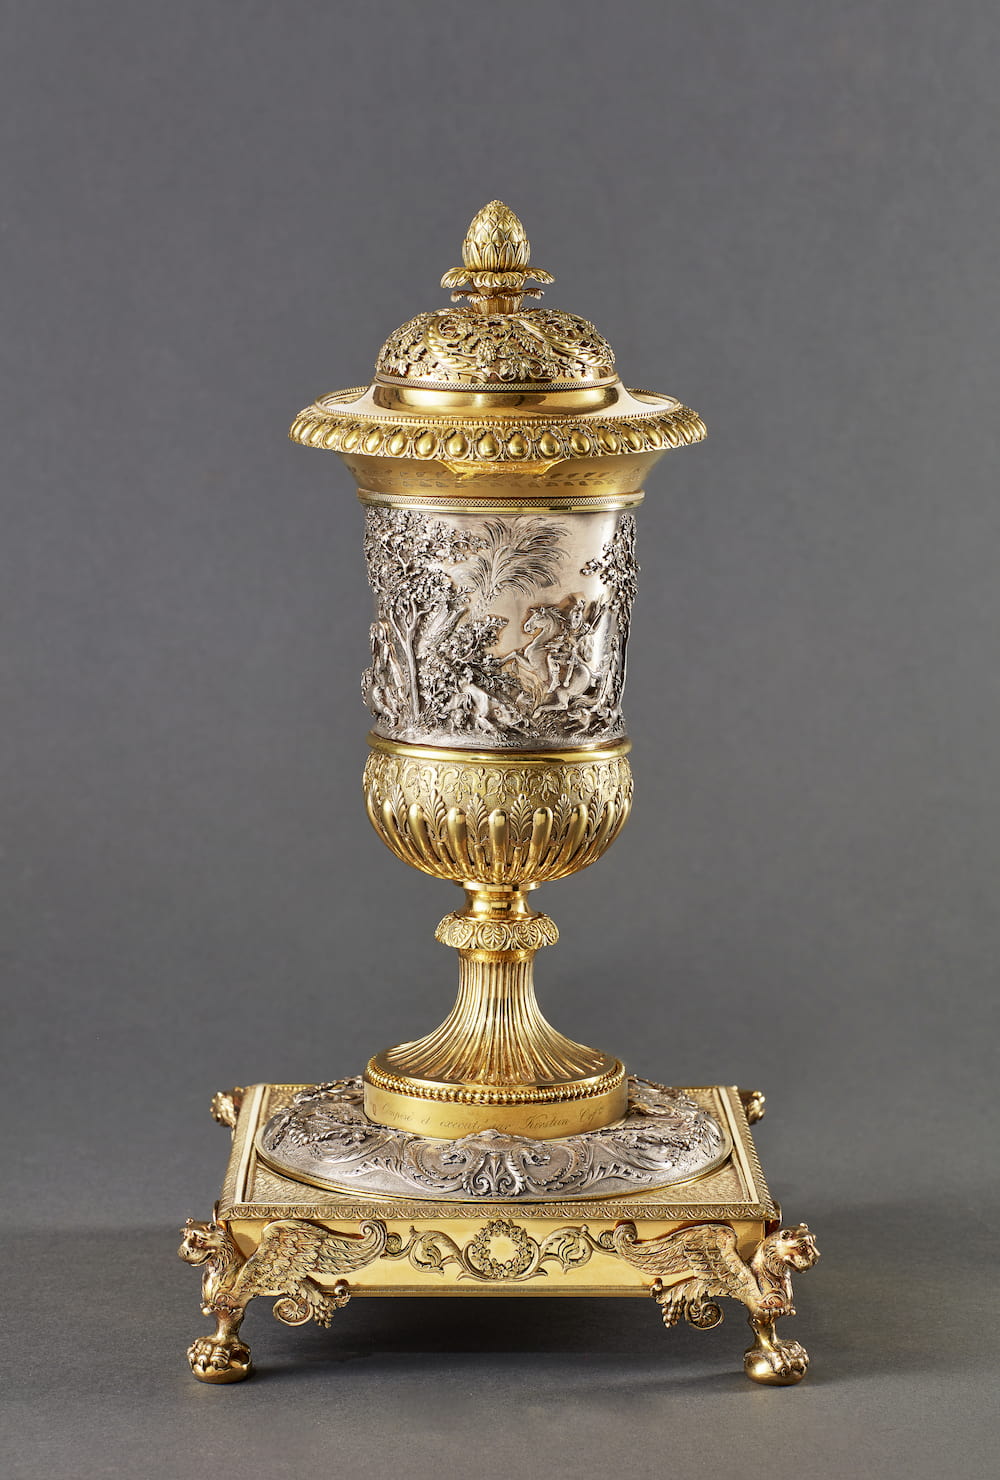 Jacques Fredéric Kirstein (1765 - 1838, master since 1795) Cup and cover with présentoir “ Lion hunt”